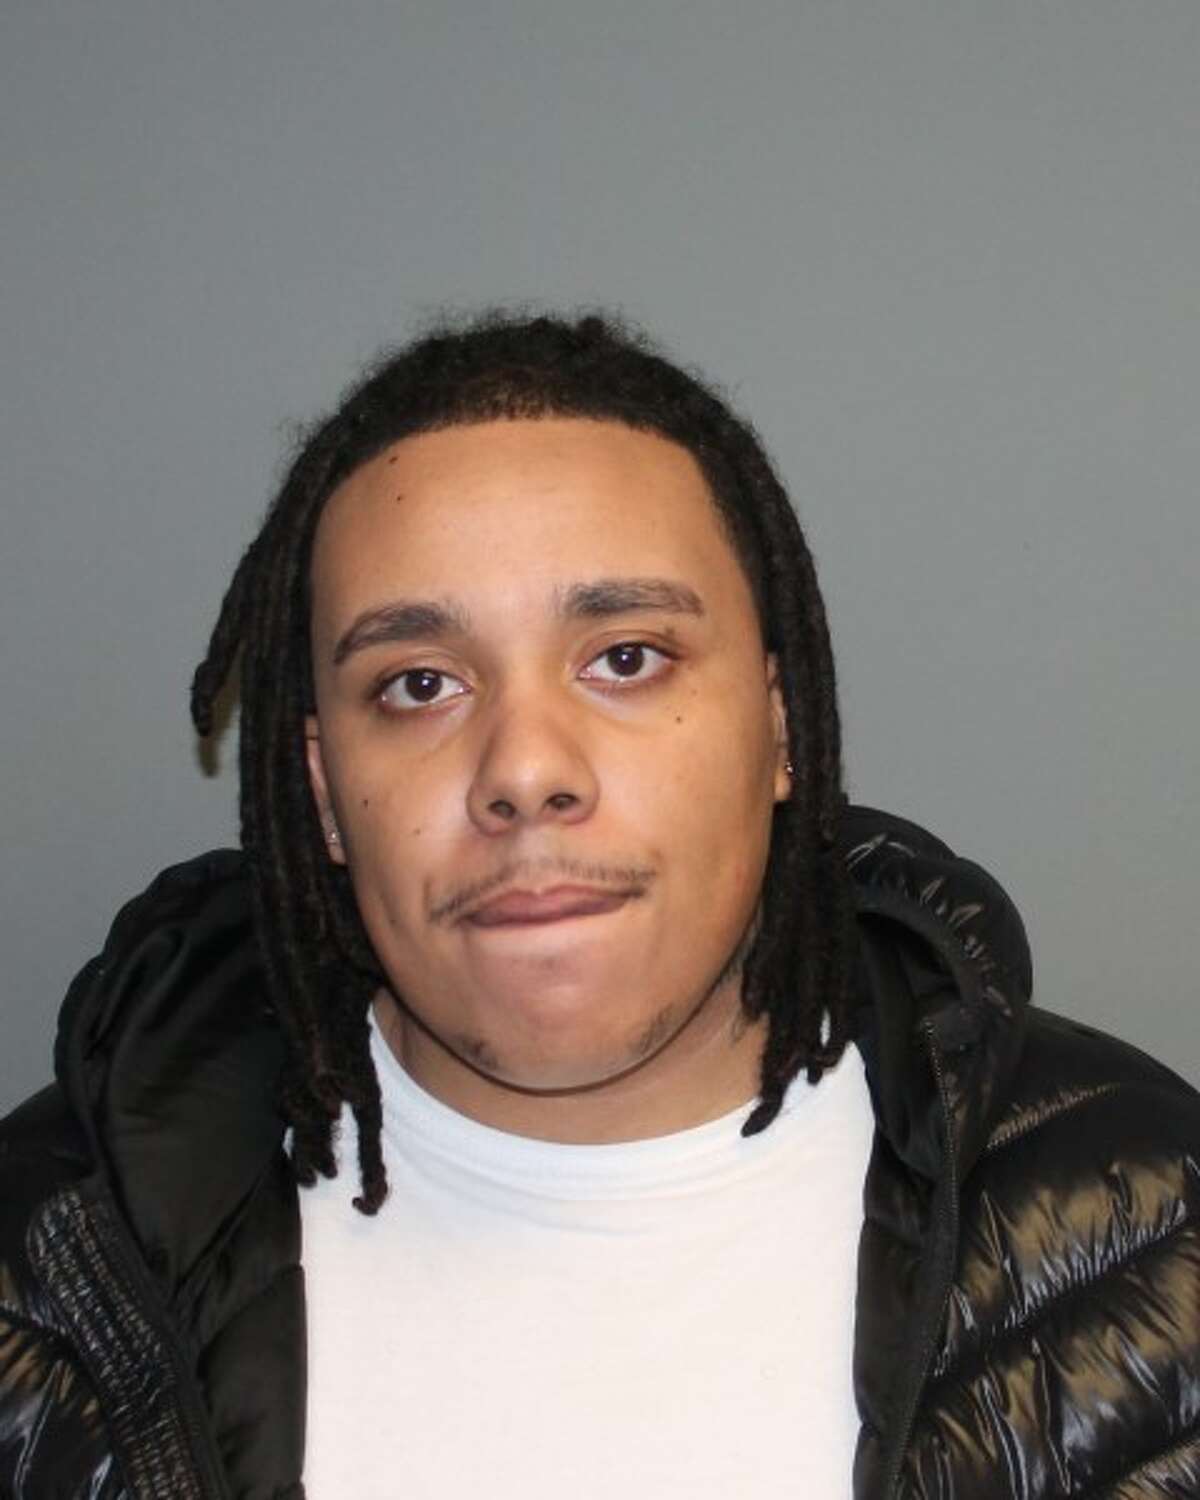 Zyair Lopez, 20, of Bridgeport, was arrested Wednesday in connection with the burglary of a Stratford Avenue hotel room on Jan. 22, according to Shelton police. During the burglary, police said, a hairless cat named Princess and several designer bags were stolen.